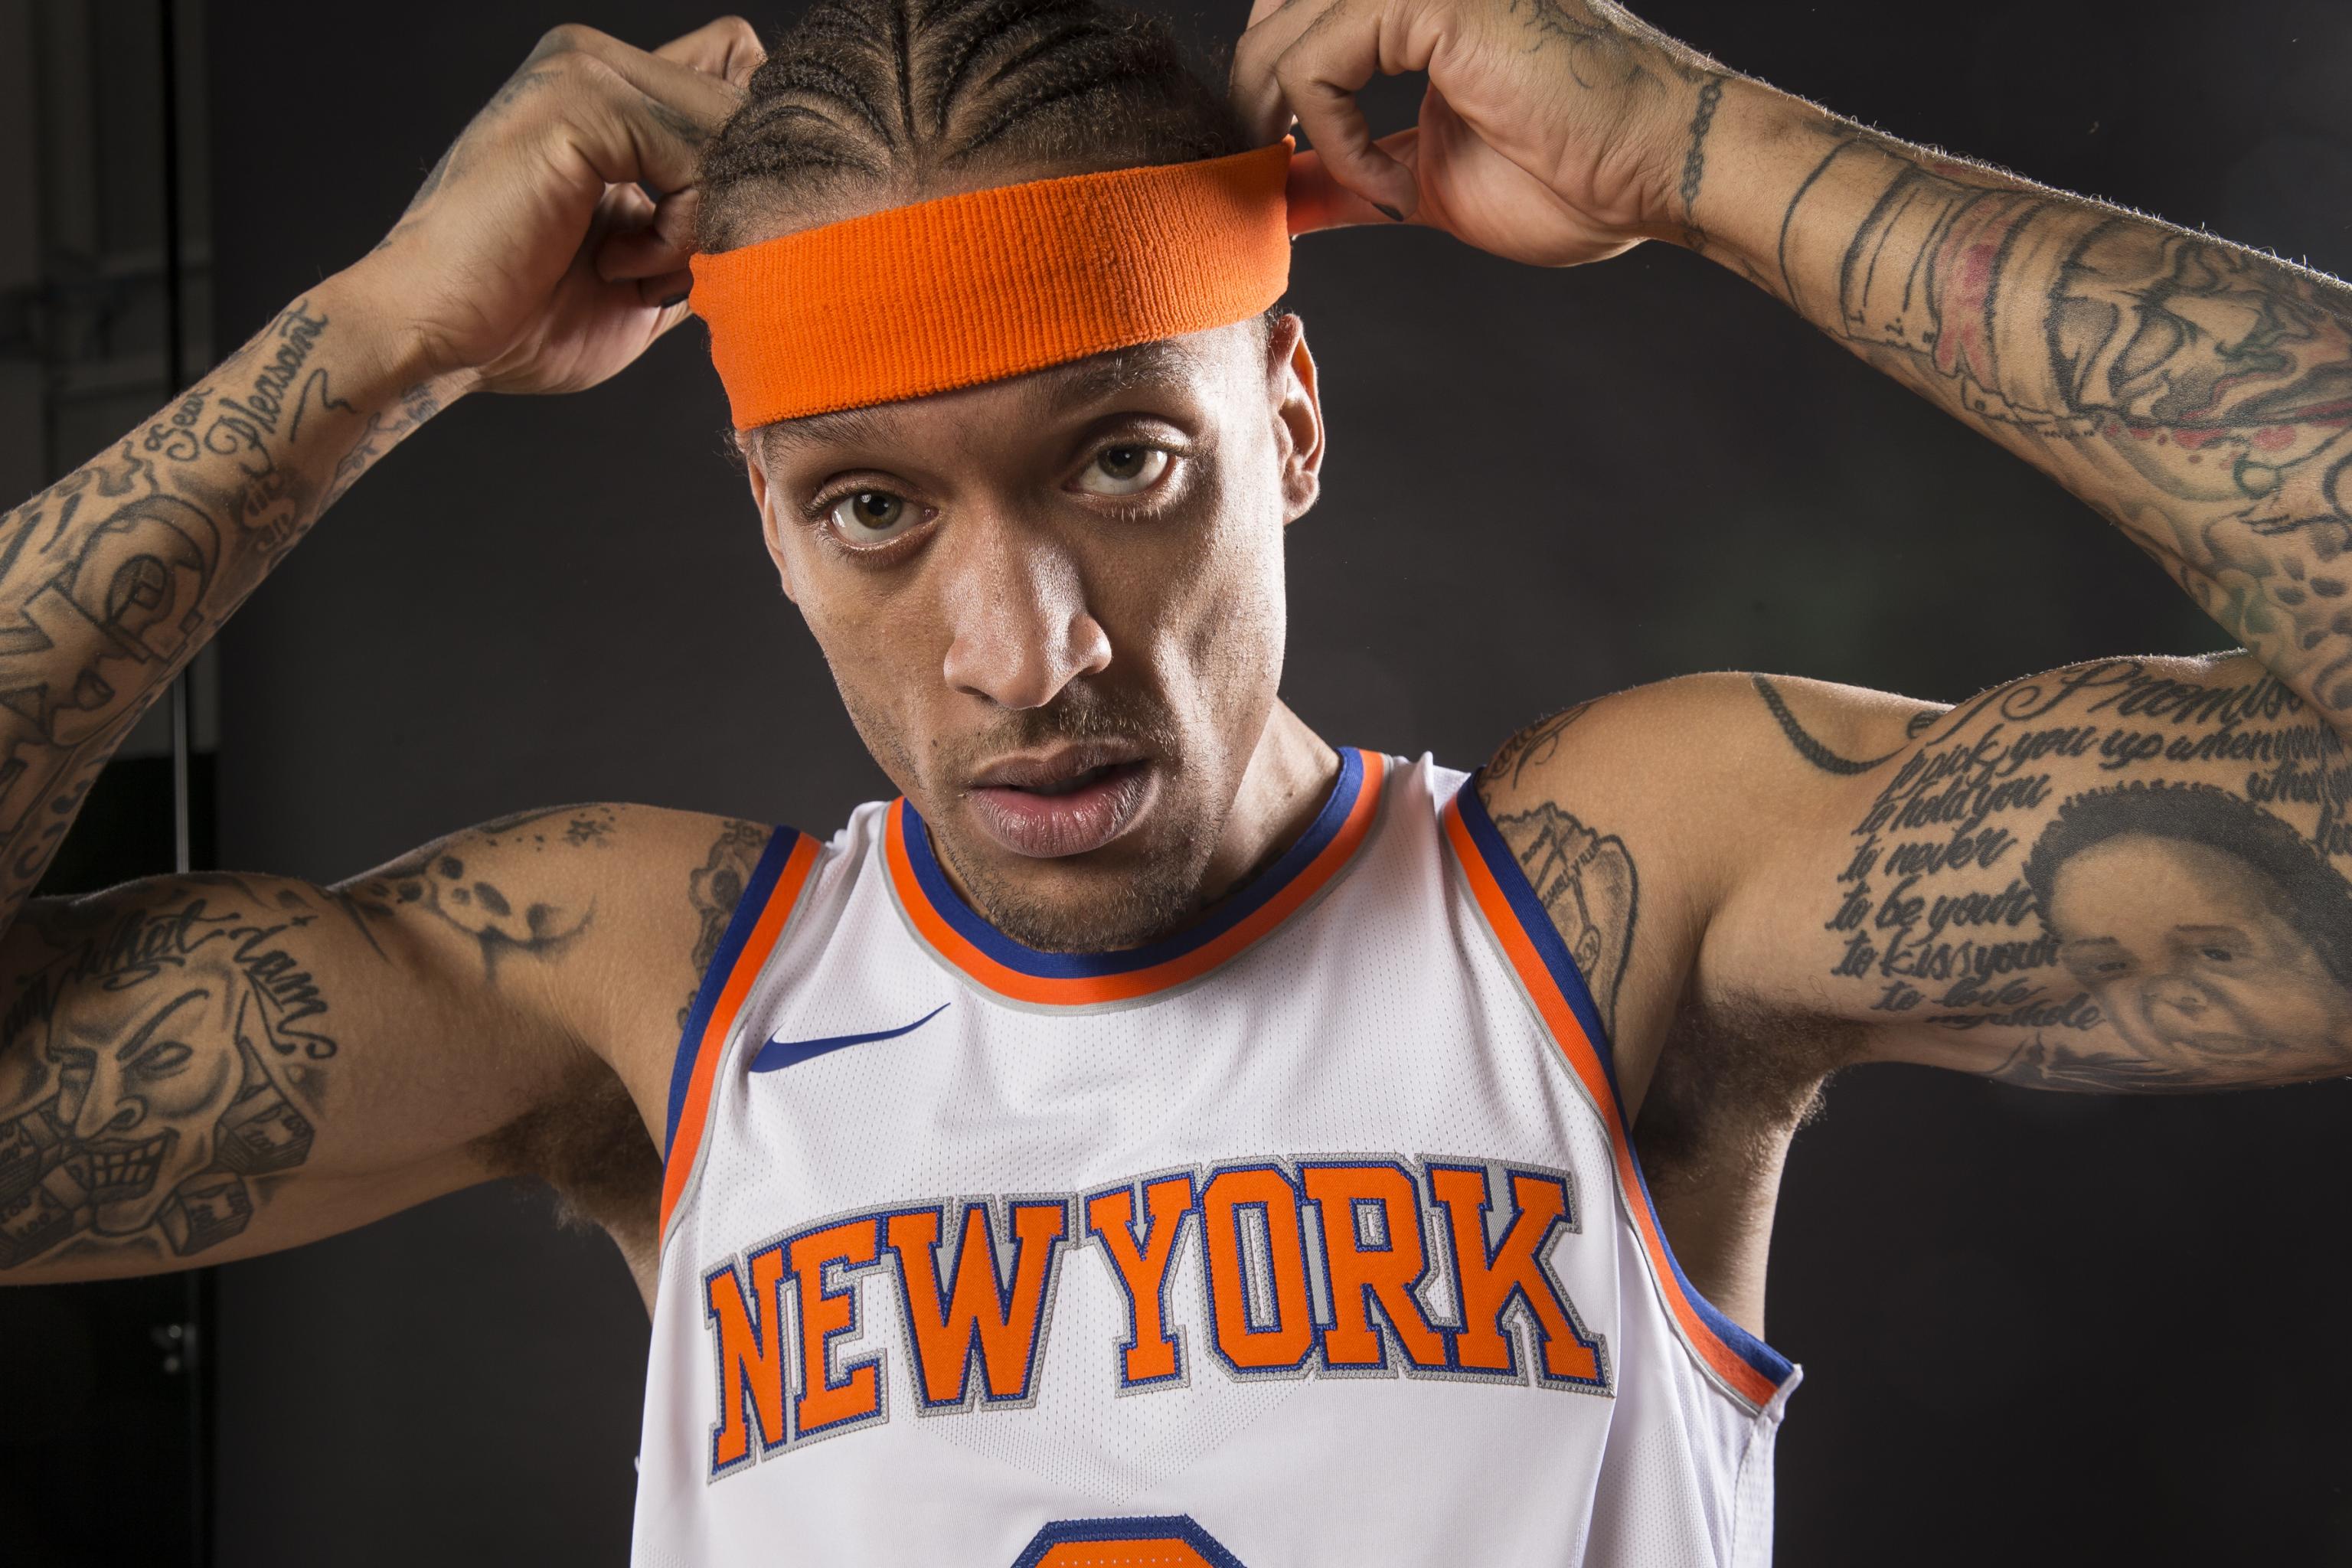 Michael Beasley Says He's a Changed Man, but Can He Prove It